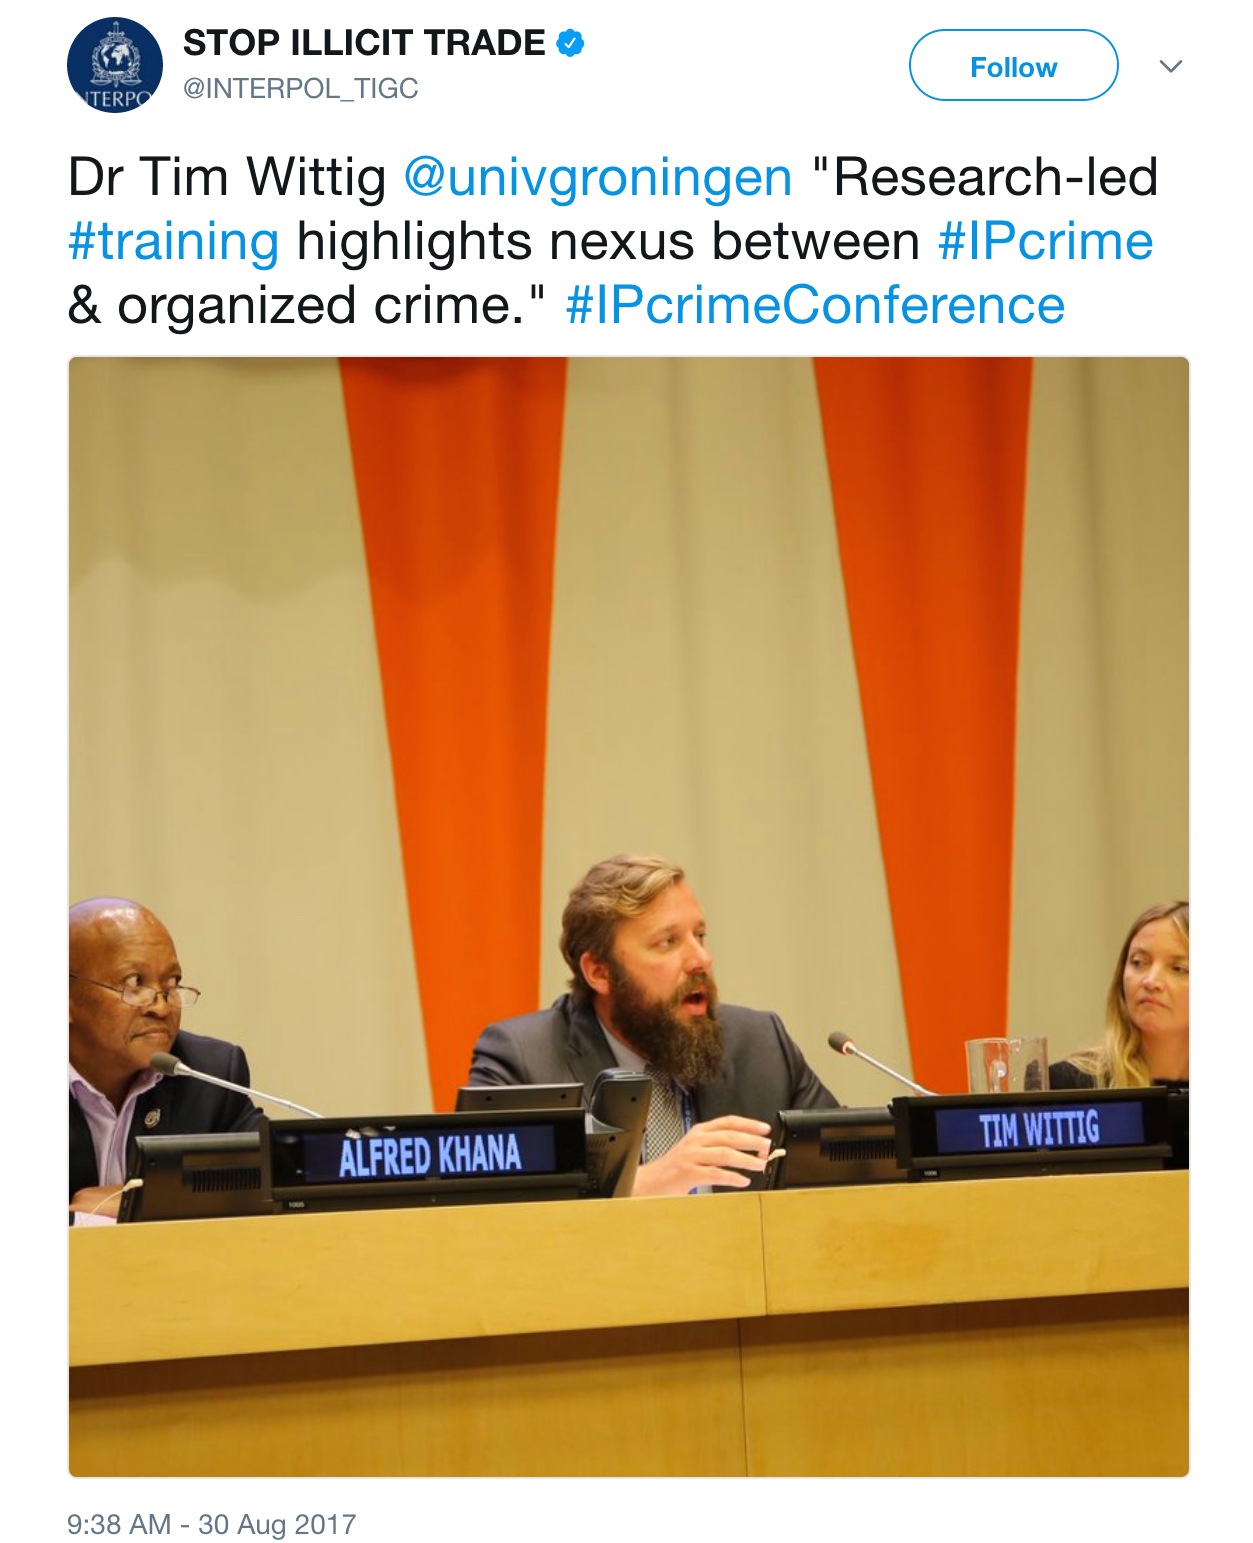  Panel at the United Nations in New York discussing Groningen's Illicit Trade Summer School as a model for research-led training.&nbsp; 